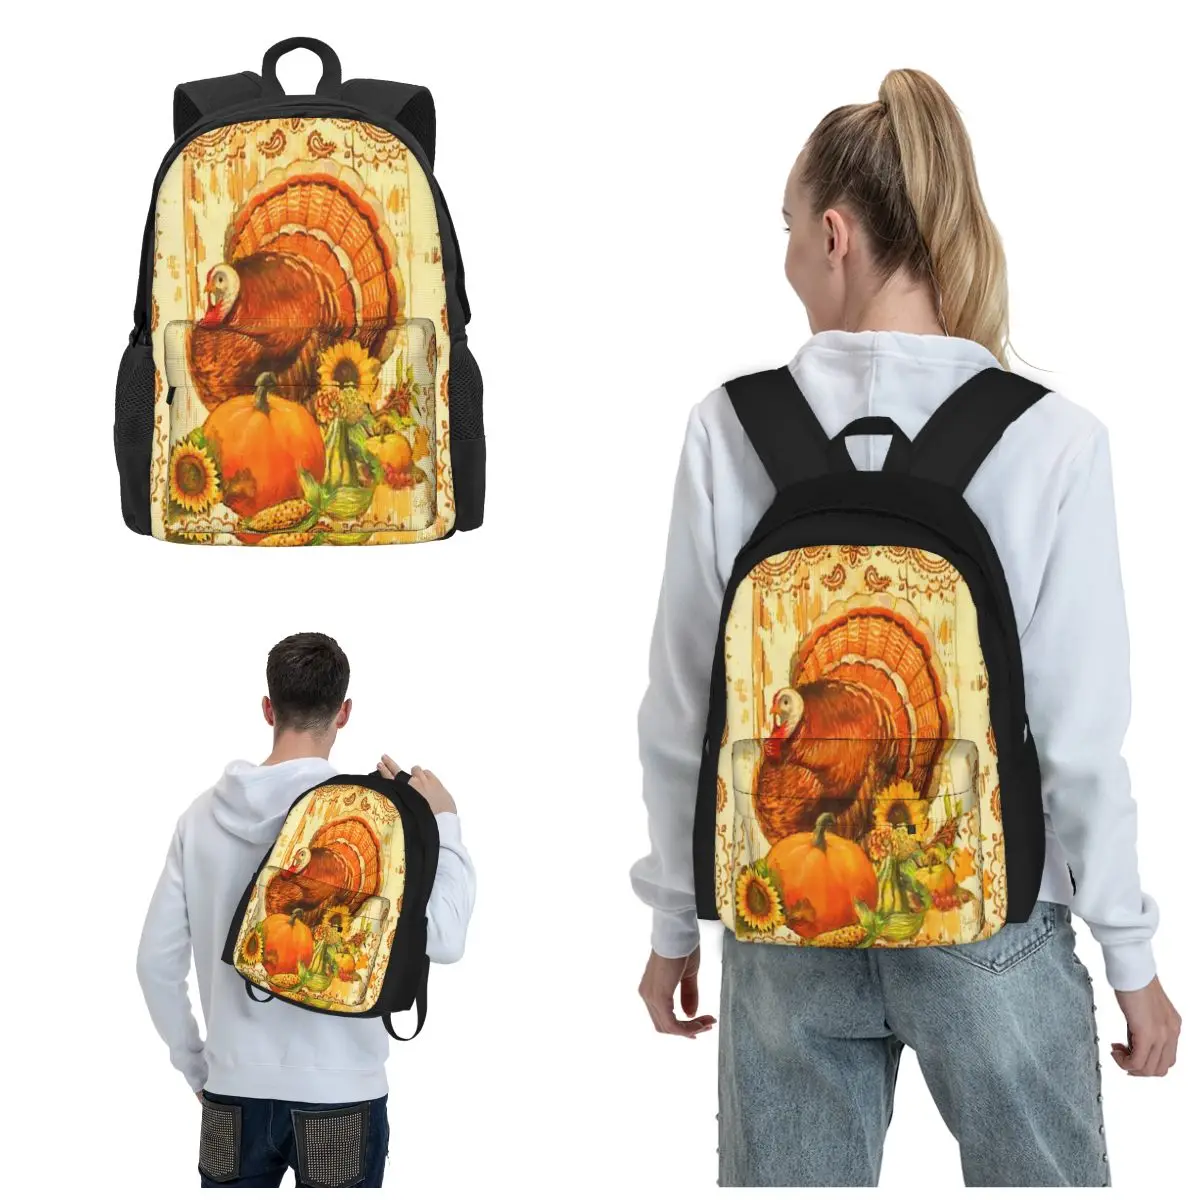 

Turkey Pumpkin Lightweight Yet Spacious Backpacks For Your Everyday Essentials Bag For Girls Boys Casual High School College